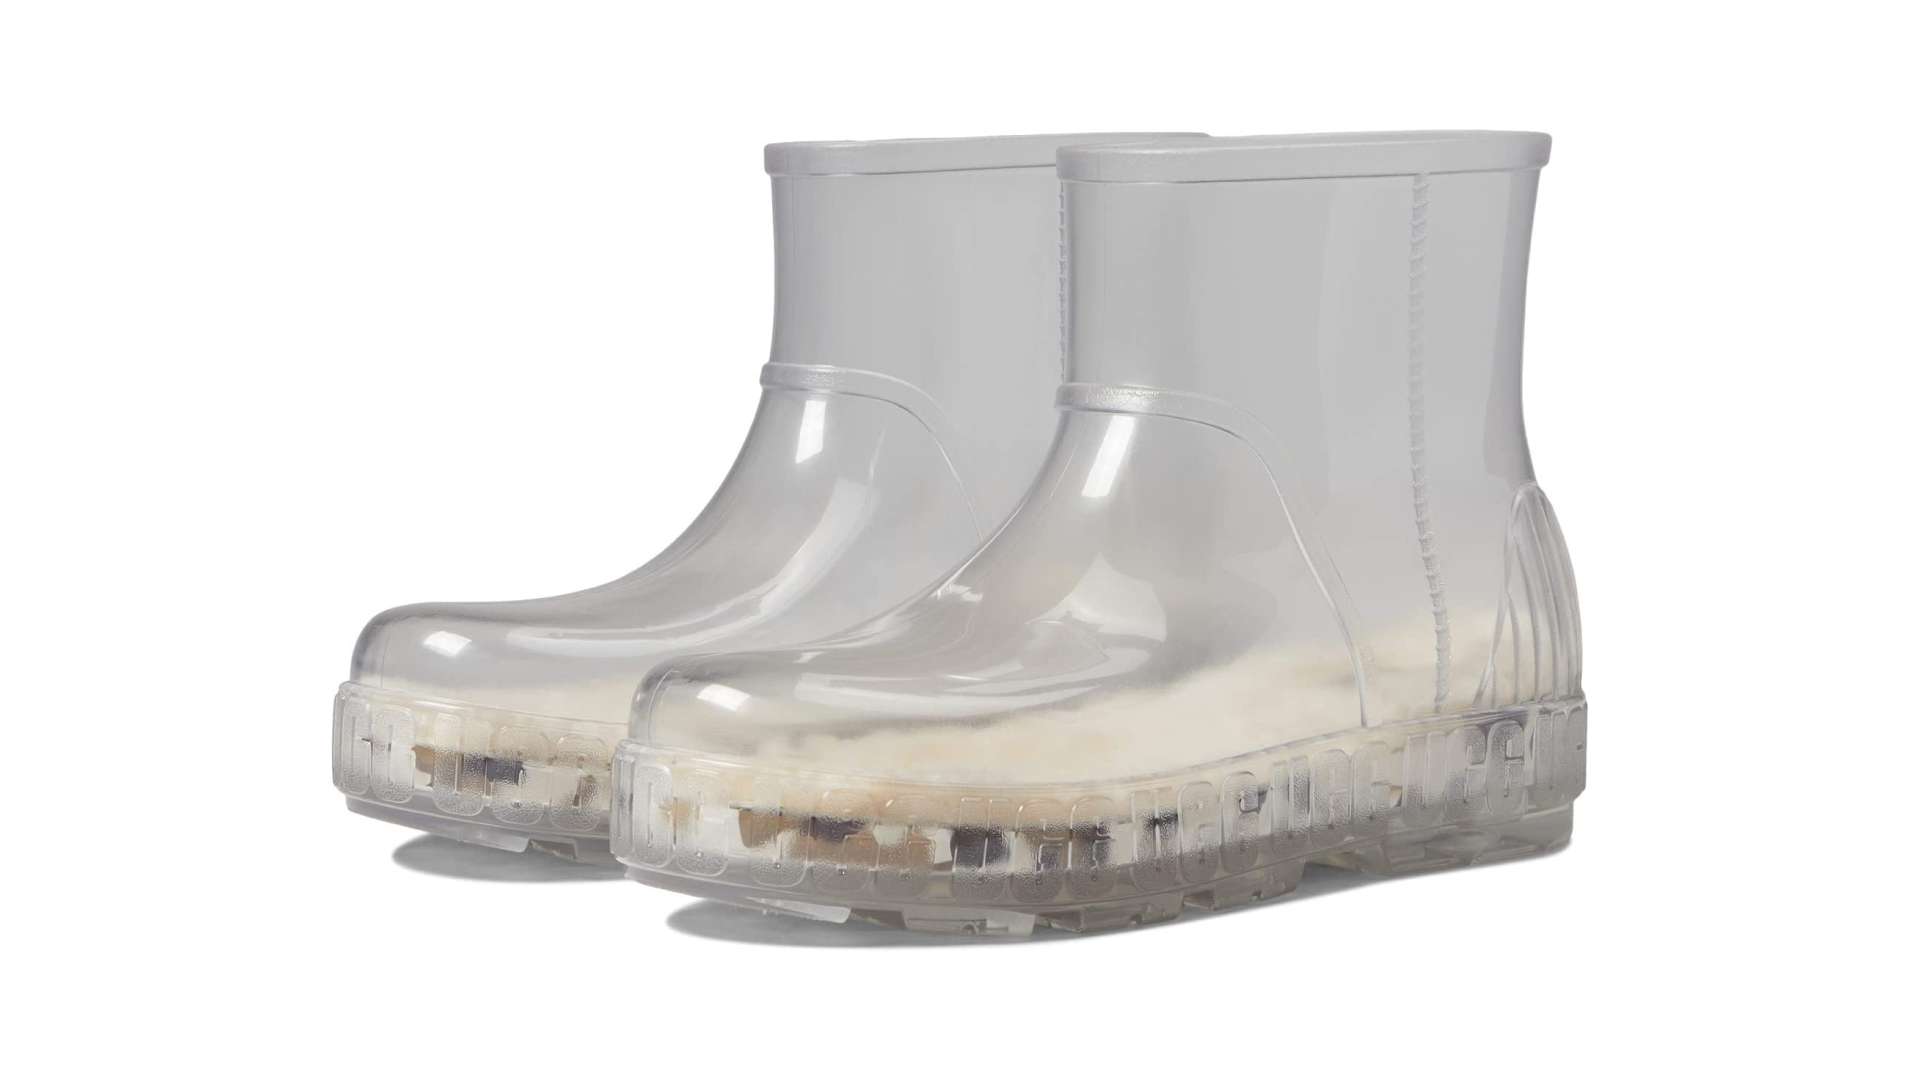 atleet dealer gat Women's Rain Boots for Every Budget and Style | theSkimm